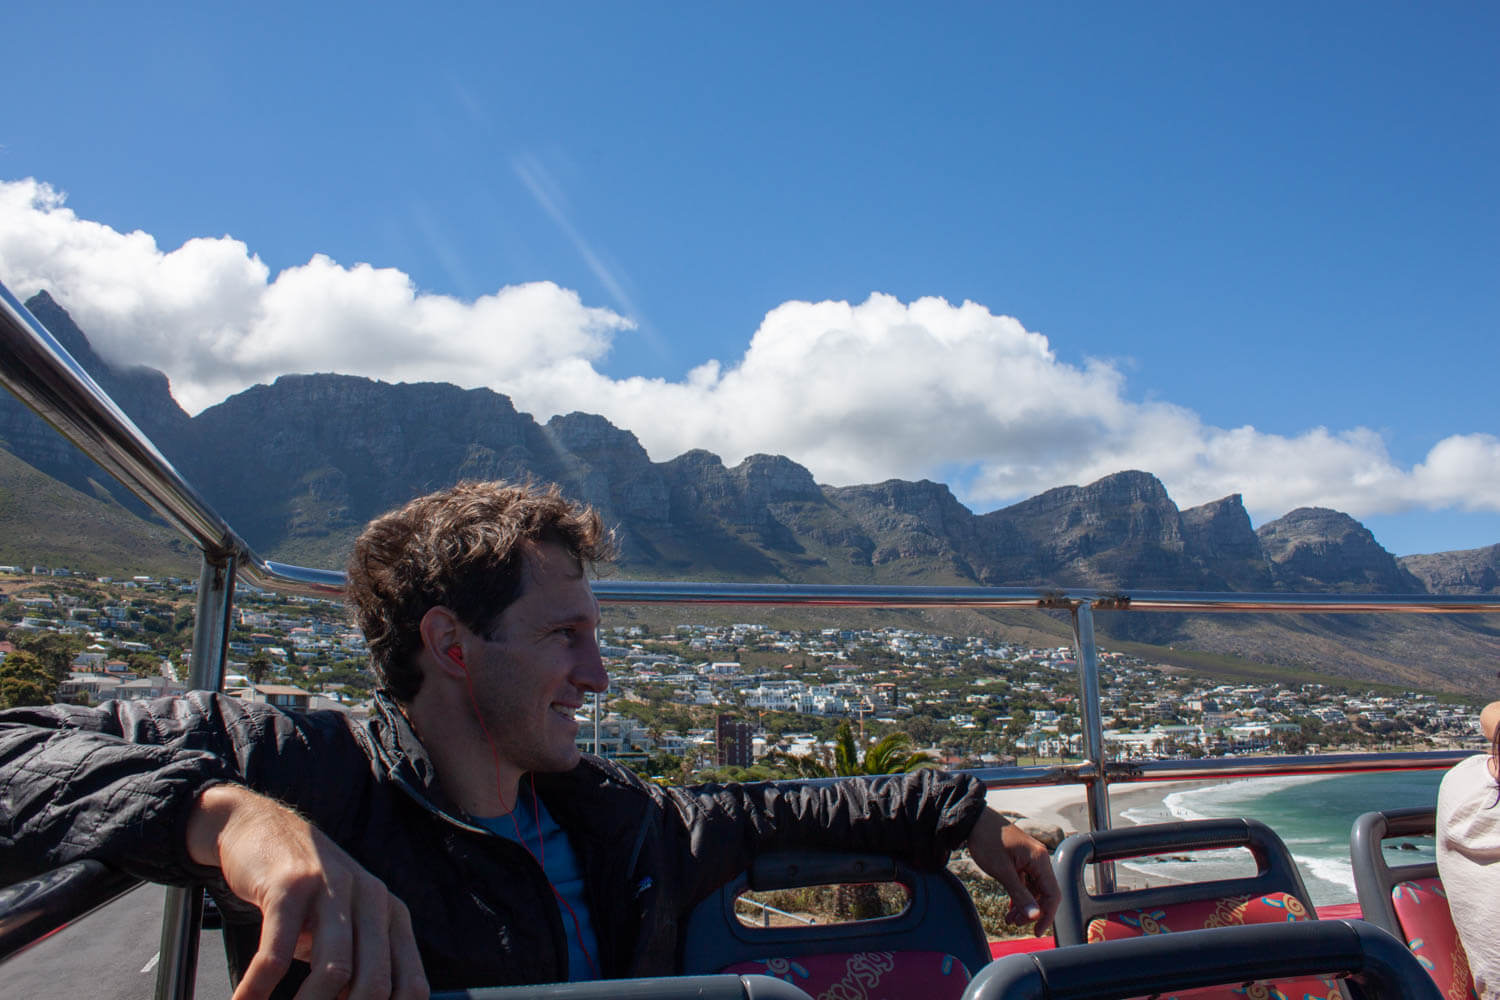 Chris chilling on the back of the hop on hop off bus with the Twelve Apostles in the background